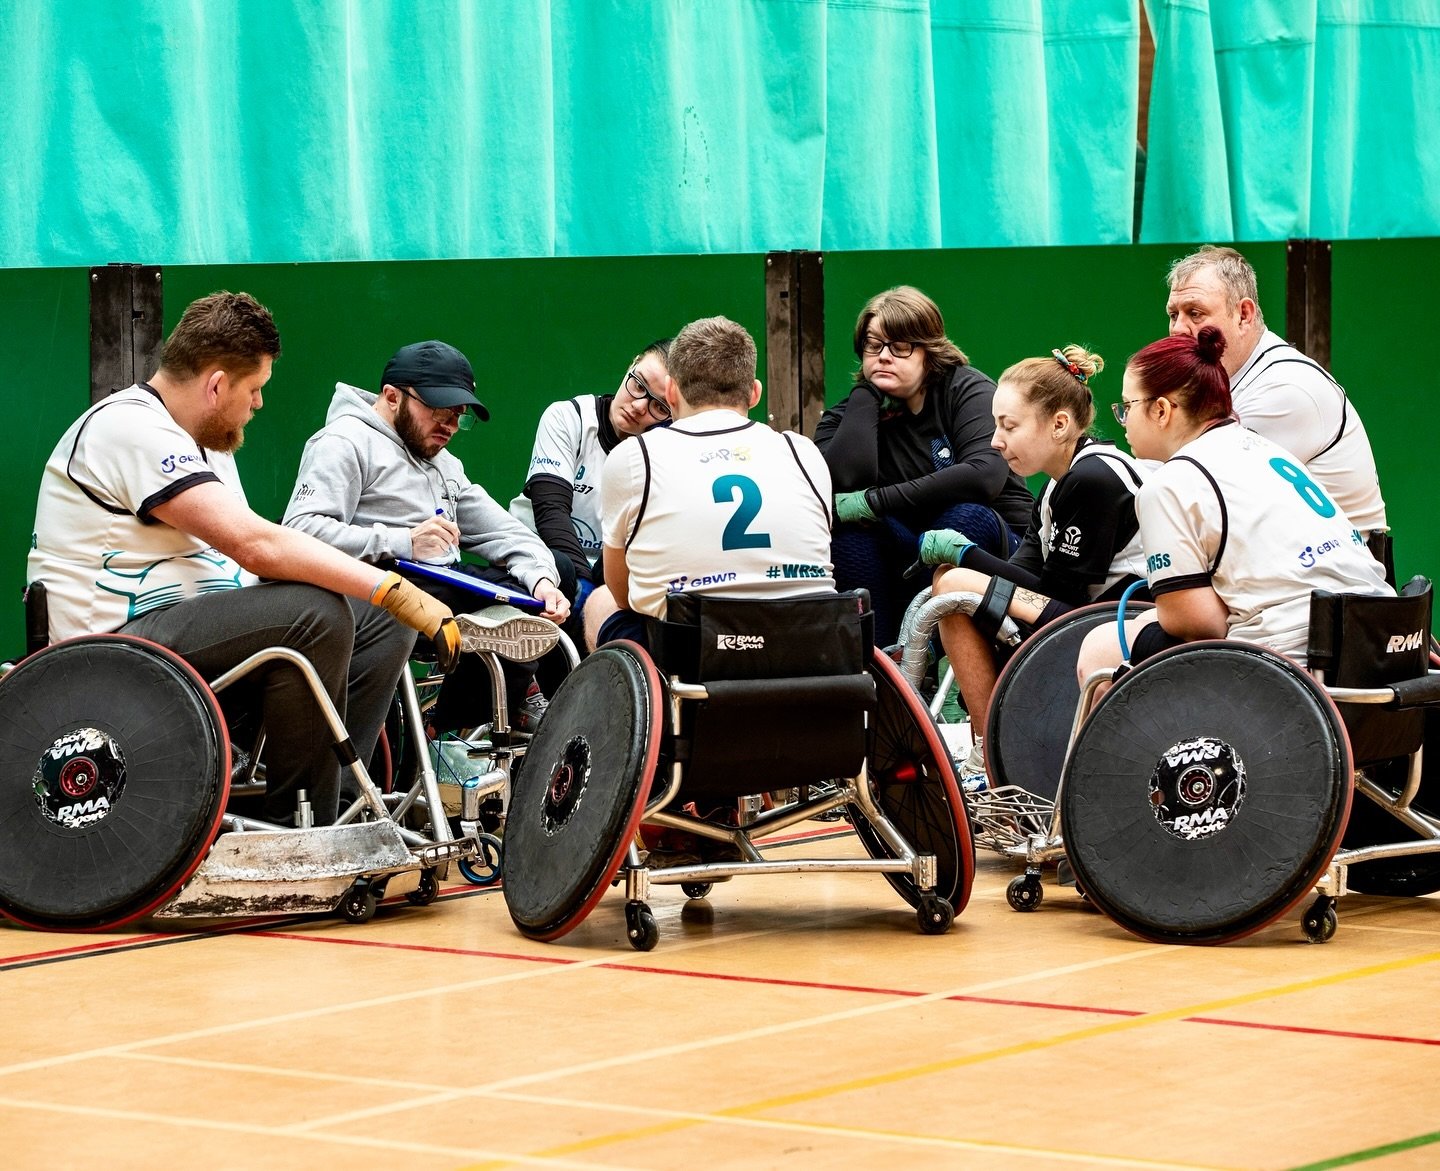 Last session before WR5s‼️

Allied Mobility 2024 Wheelchair Rugby 5s 
#wr5s #wheelchairrugby #RugbyFives #GBWR #NewcastleRugby #NDL  #RocketLeague #RugbyWheels #NDL #abarbarian #TyneAndWear #WheelchairSport #disabilityawareness  #parasport  #disabili